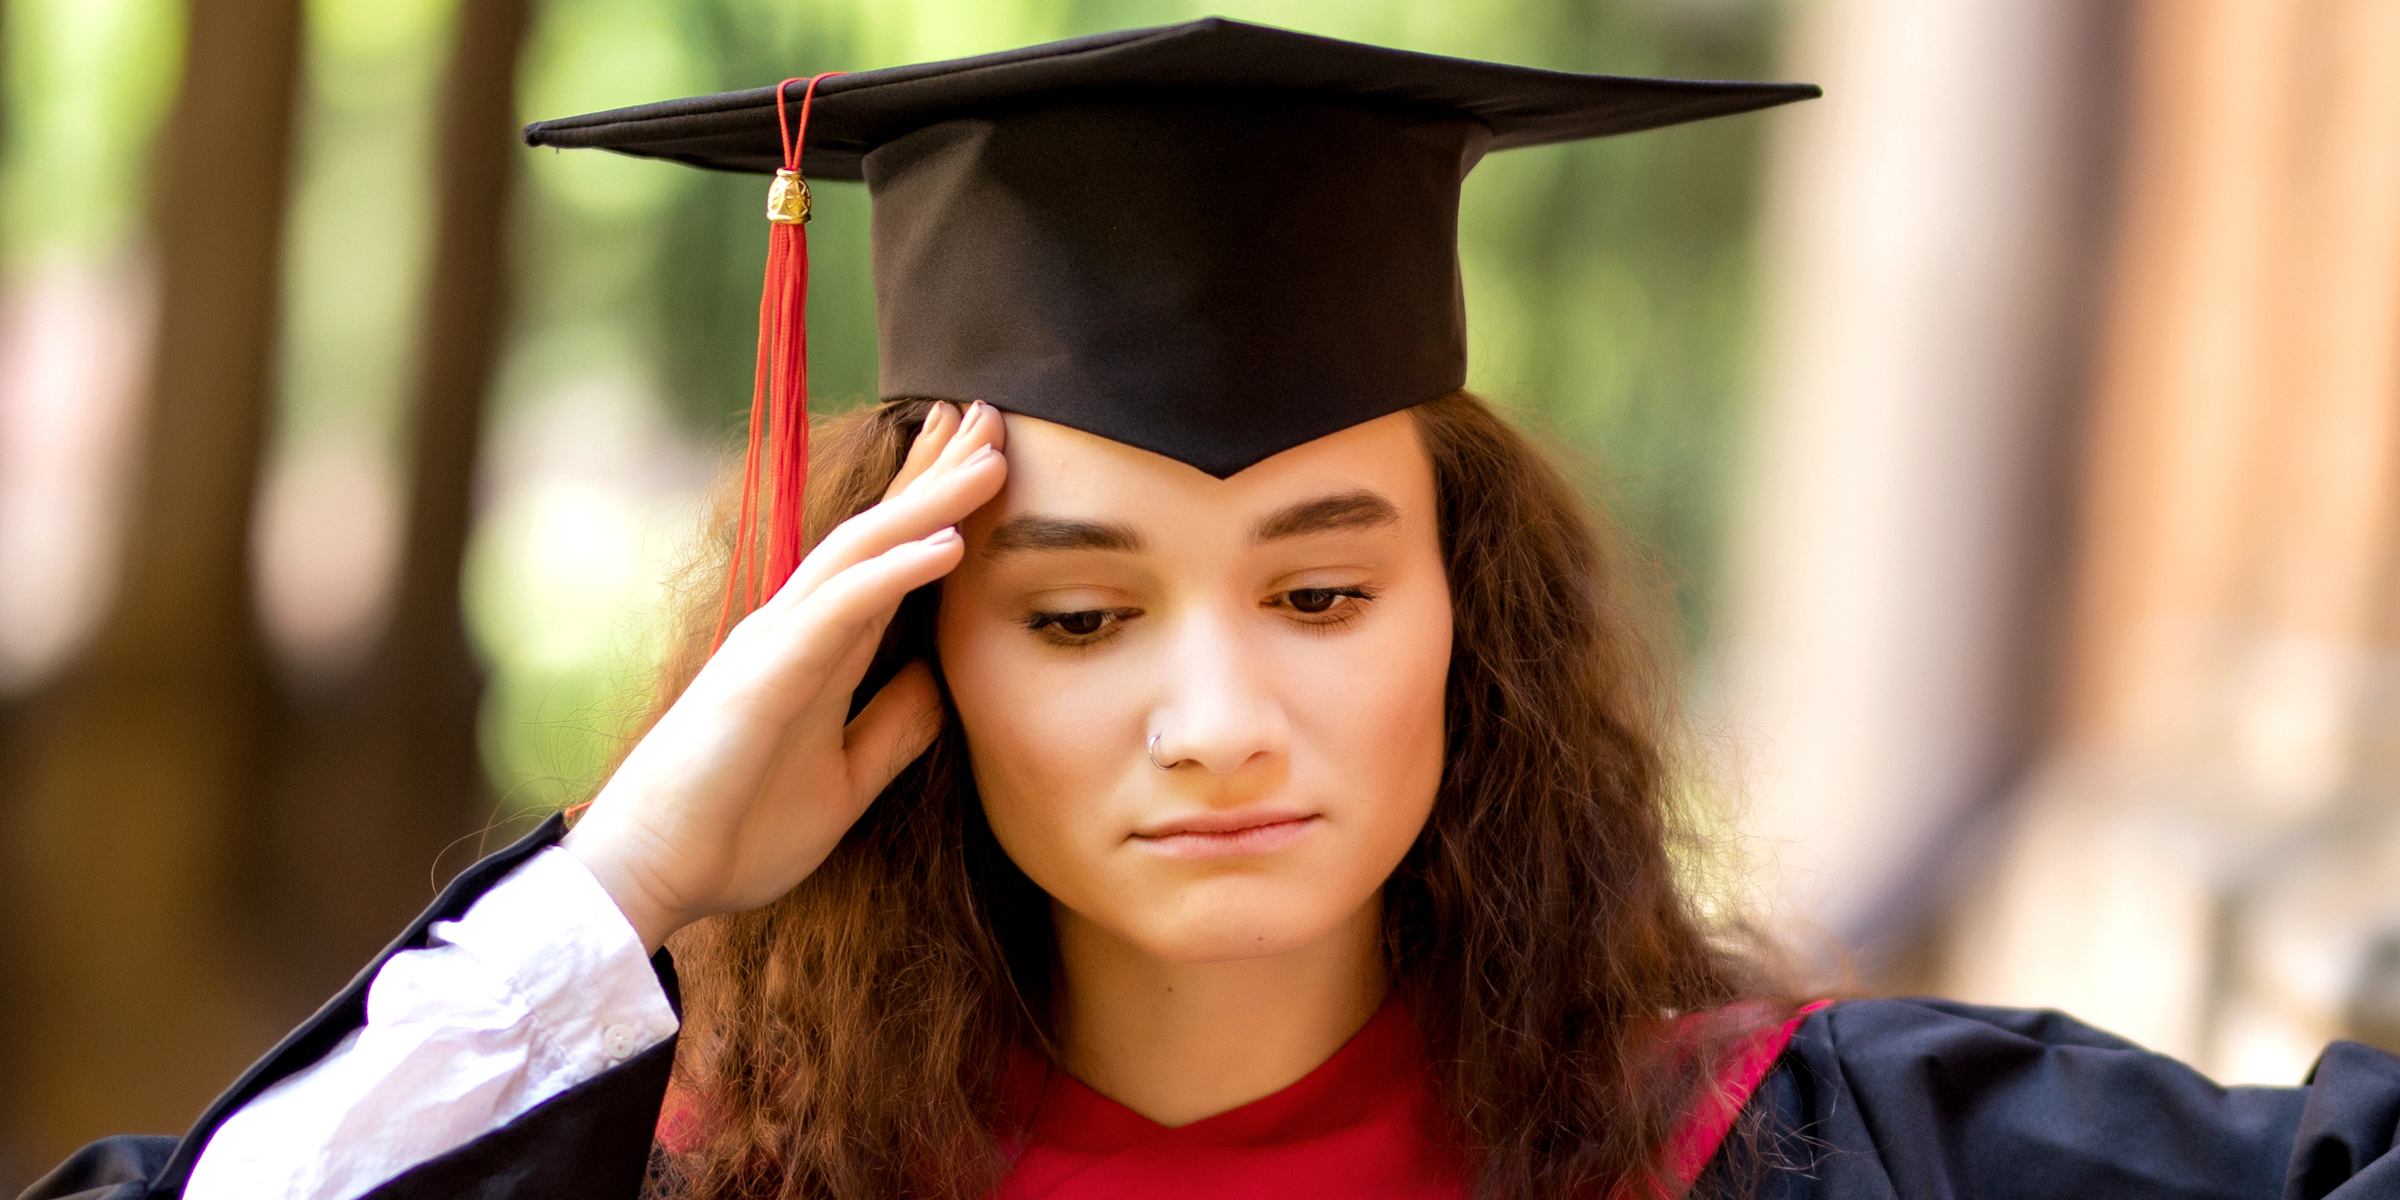 A young woman dressed for graduation | Source: Shutterstock